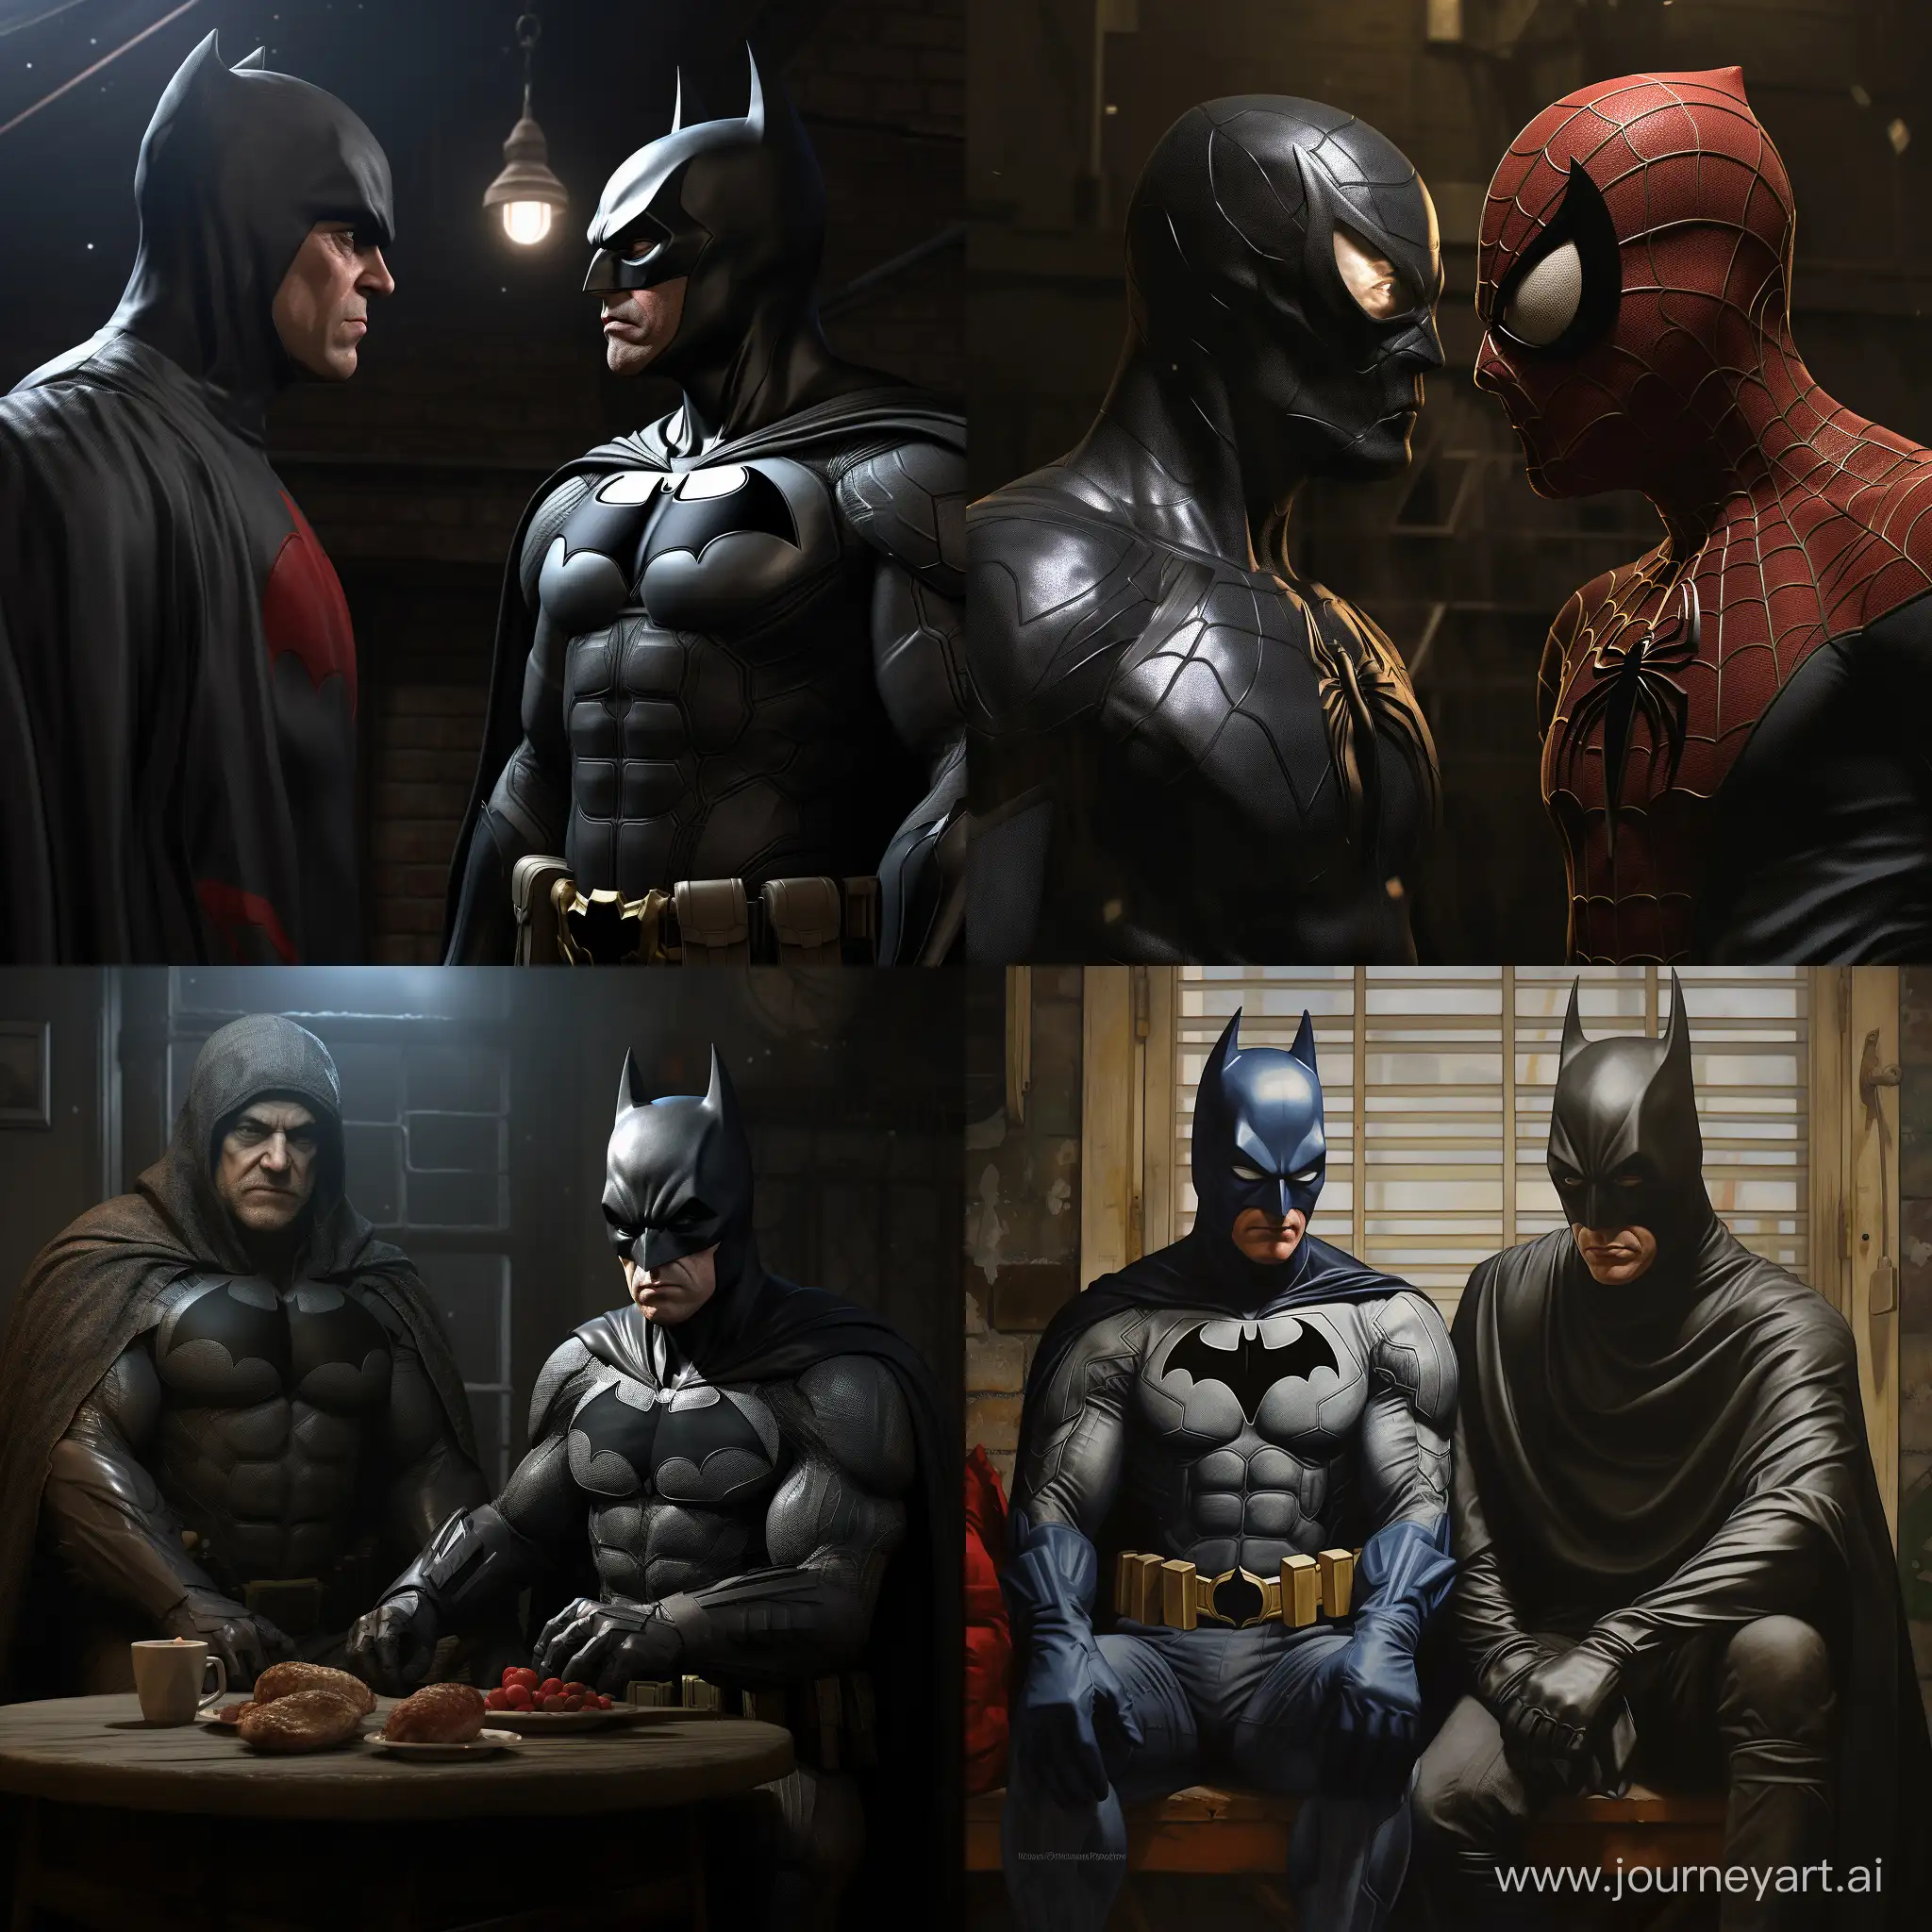 Dynamic-Encounter-Spiderman-and-Batman-Unite-in-Epic-Action